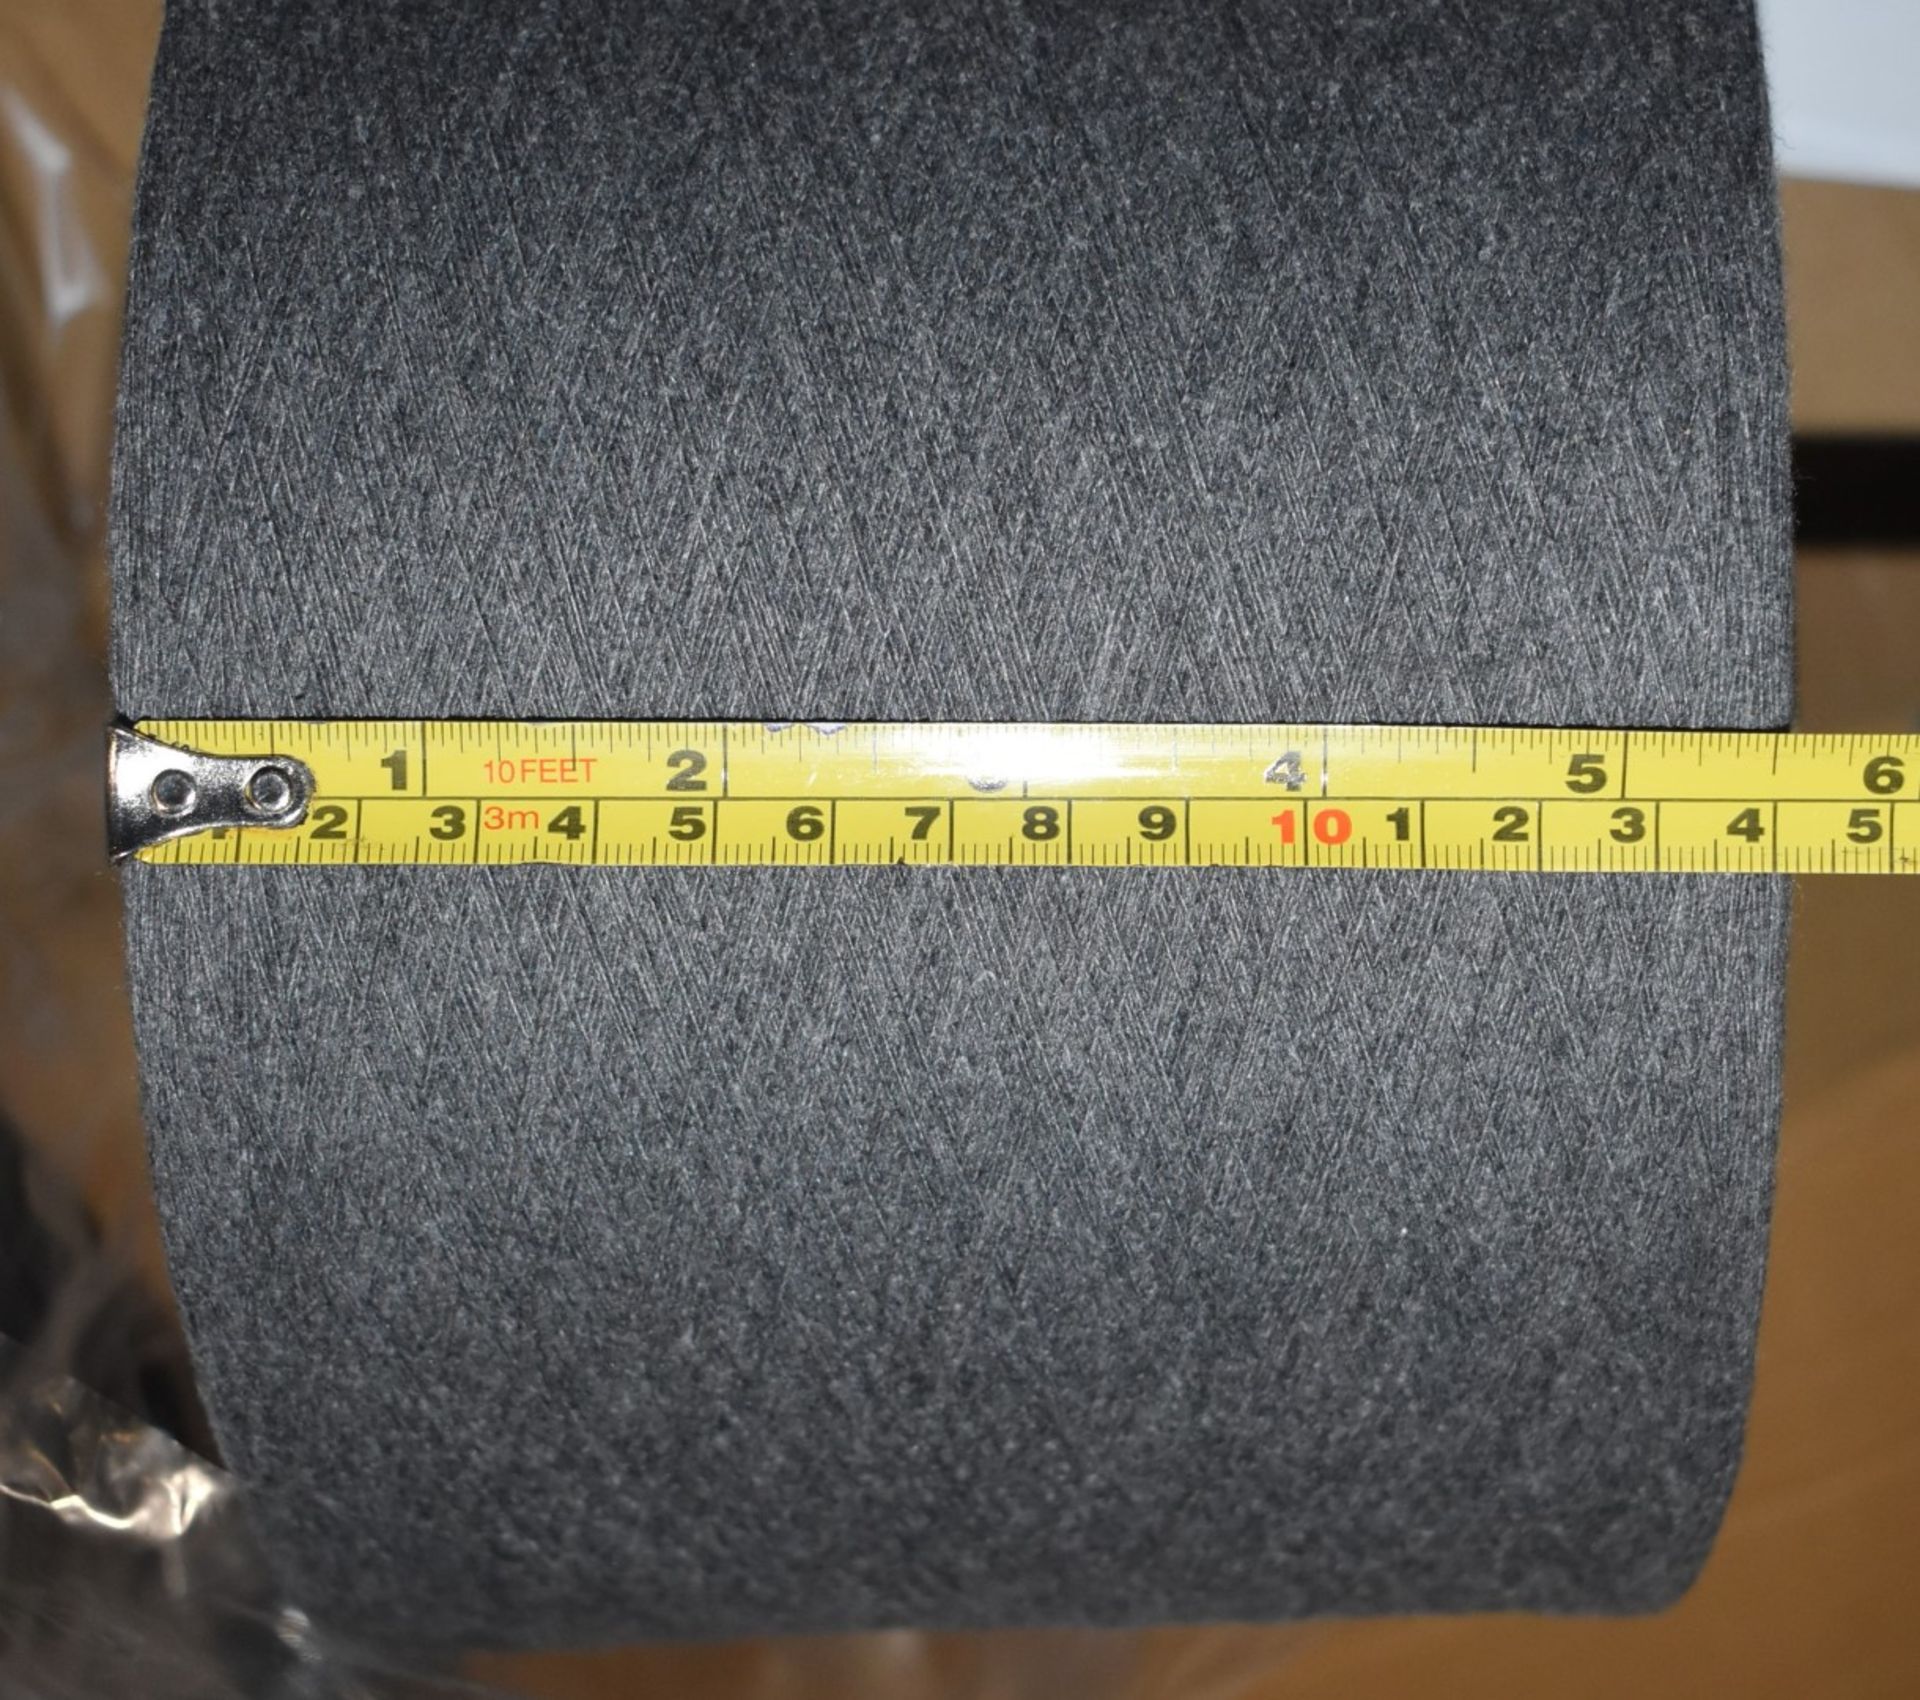 18 x Cones of 1/13 MicroCotton Knitting Yarn - Mid Grey - Approx Weight: 2,500g - New Stock ABL Yarn - Image 10 of 16